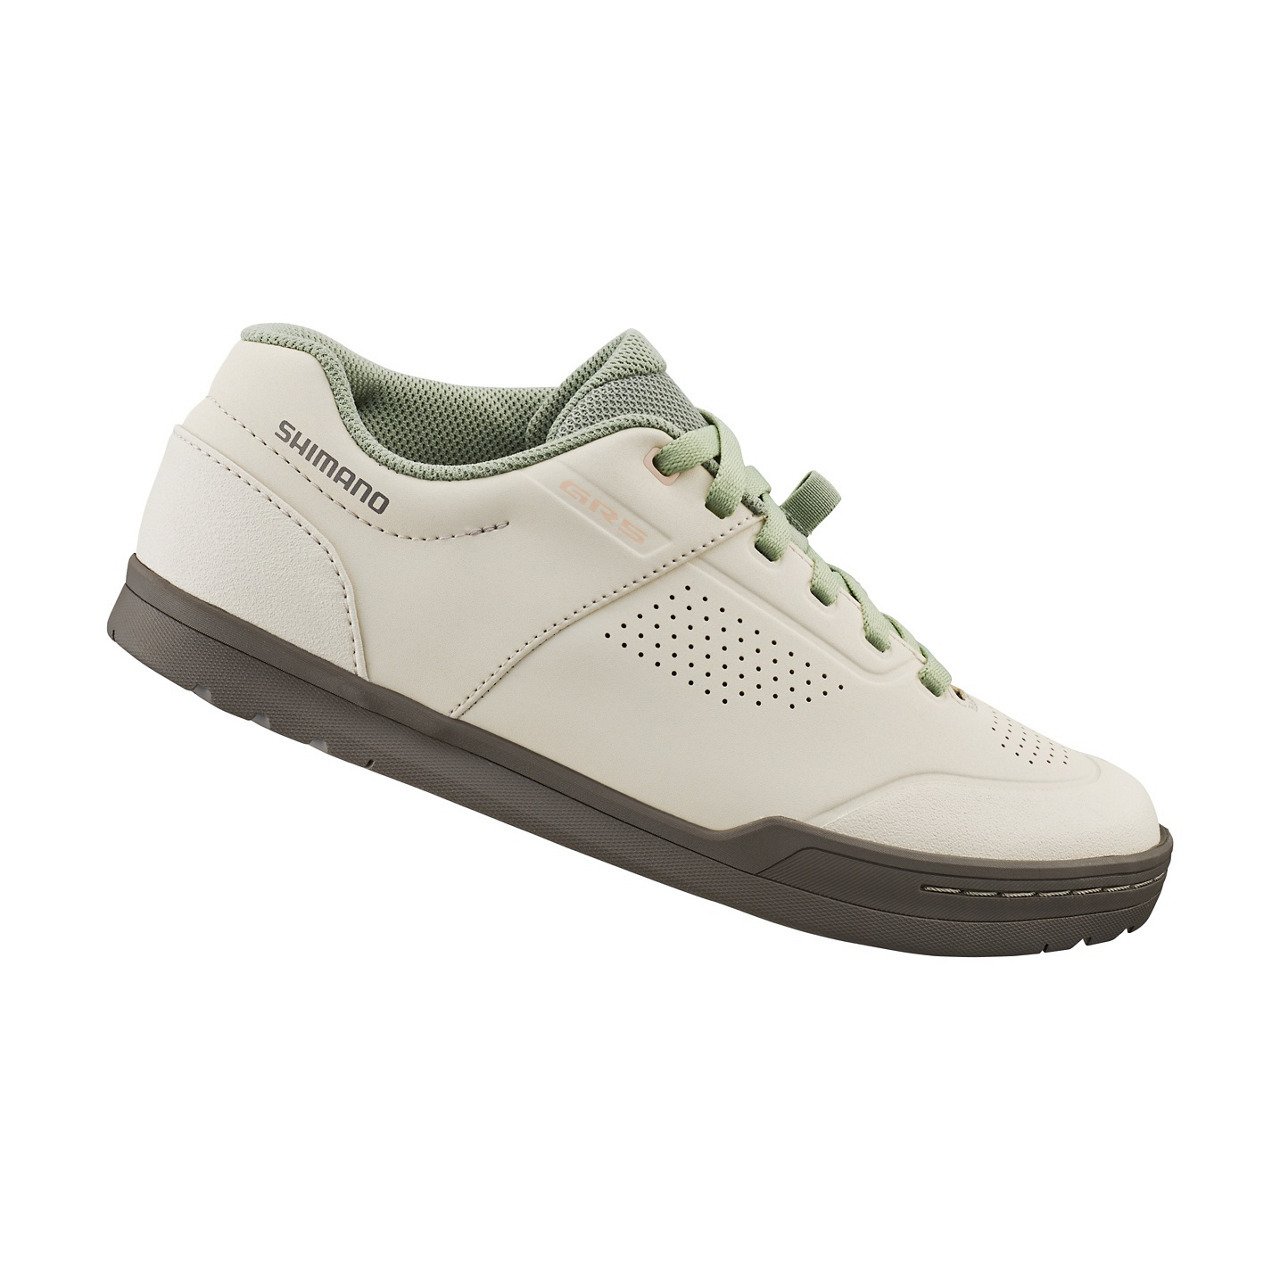 Chaussures femme Shimano Sh-Gr501